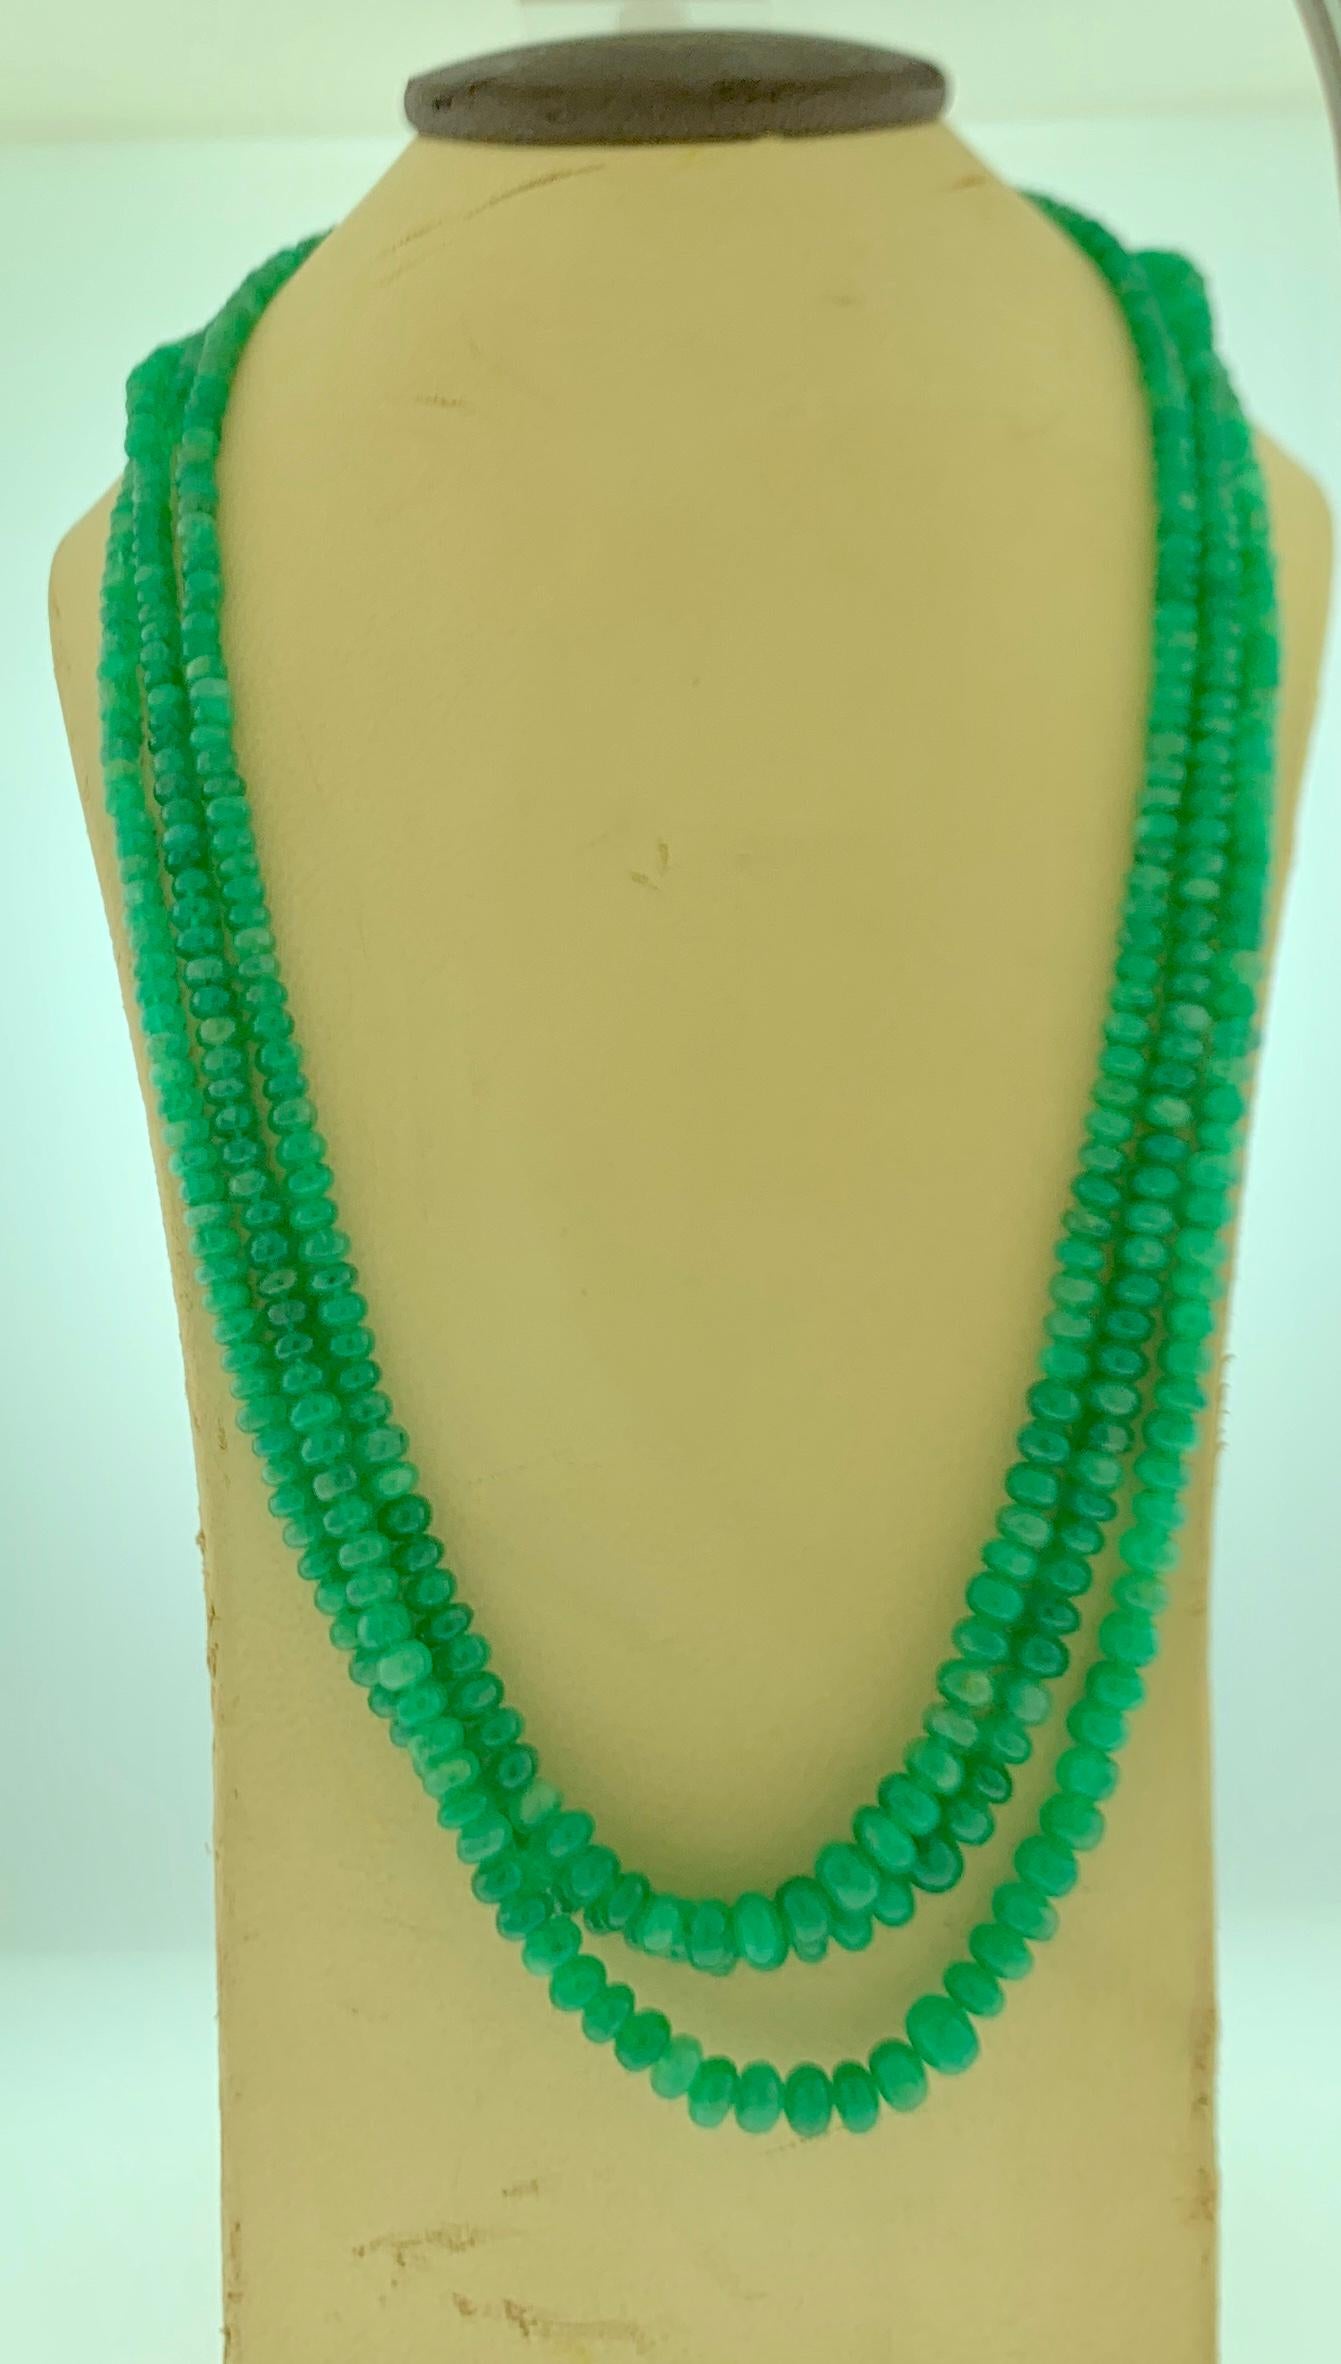 Round Cut 150 Carat 3 Layer Brazilian Emerald Bead Necklace Sterling Silver Clasp